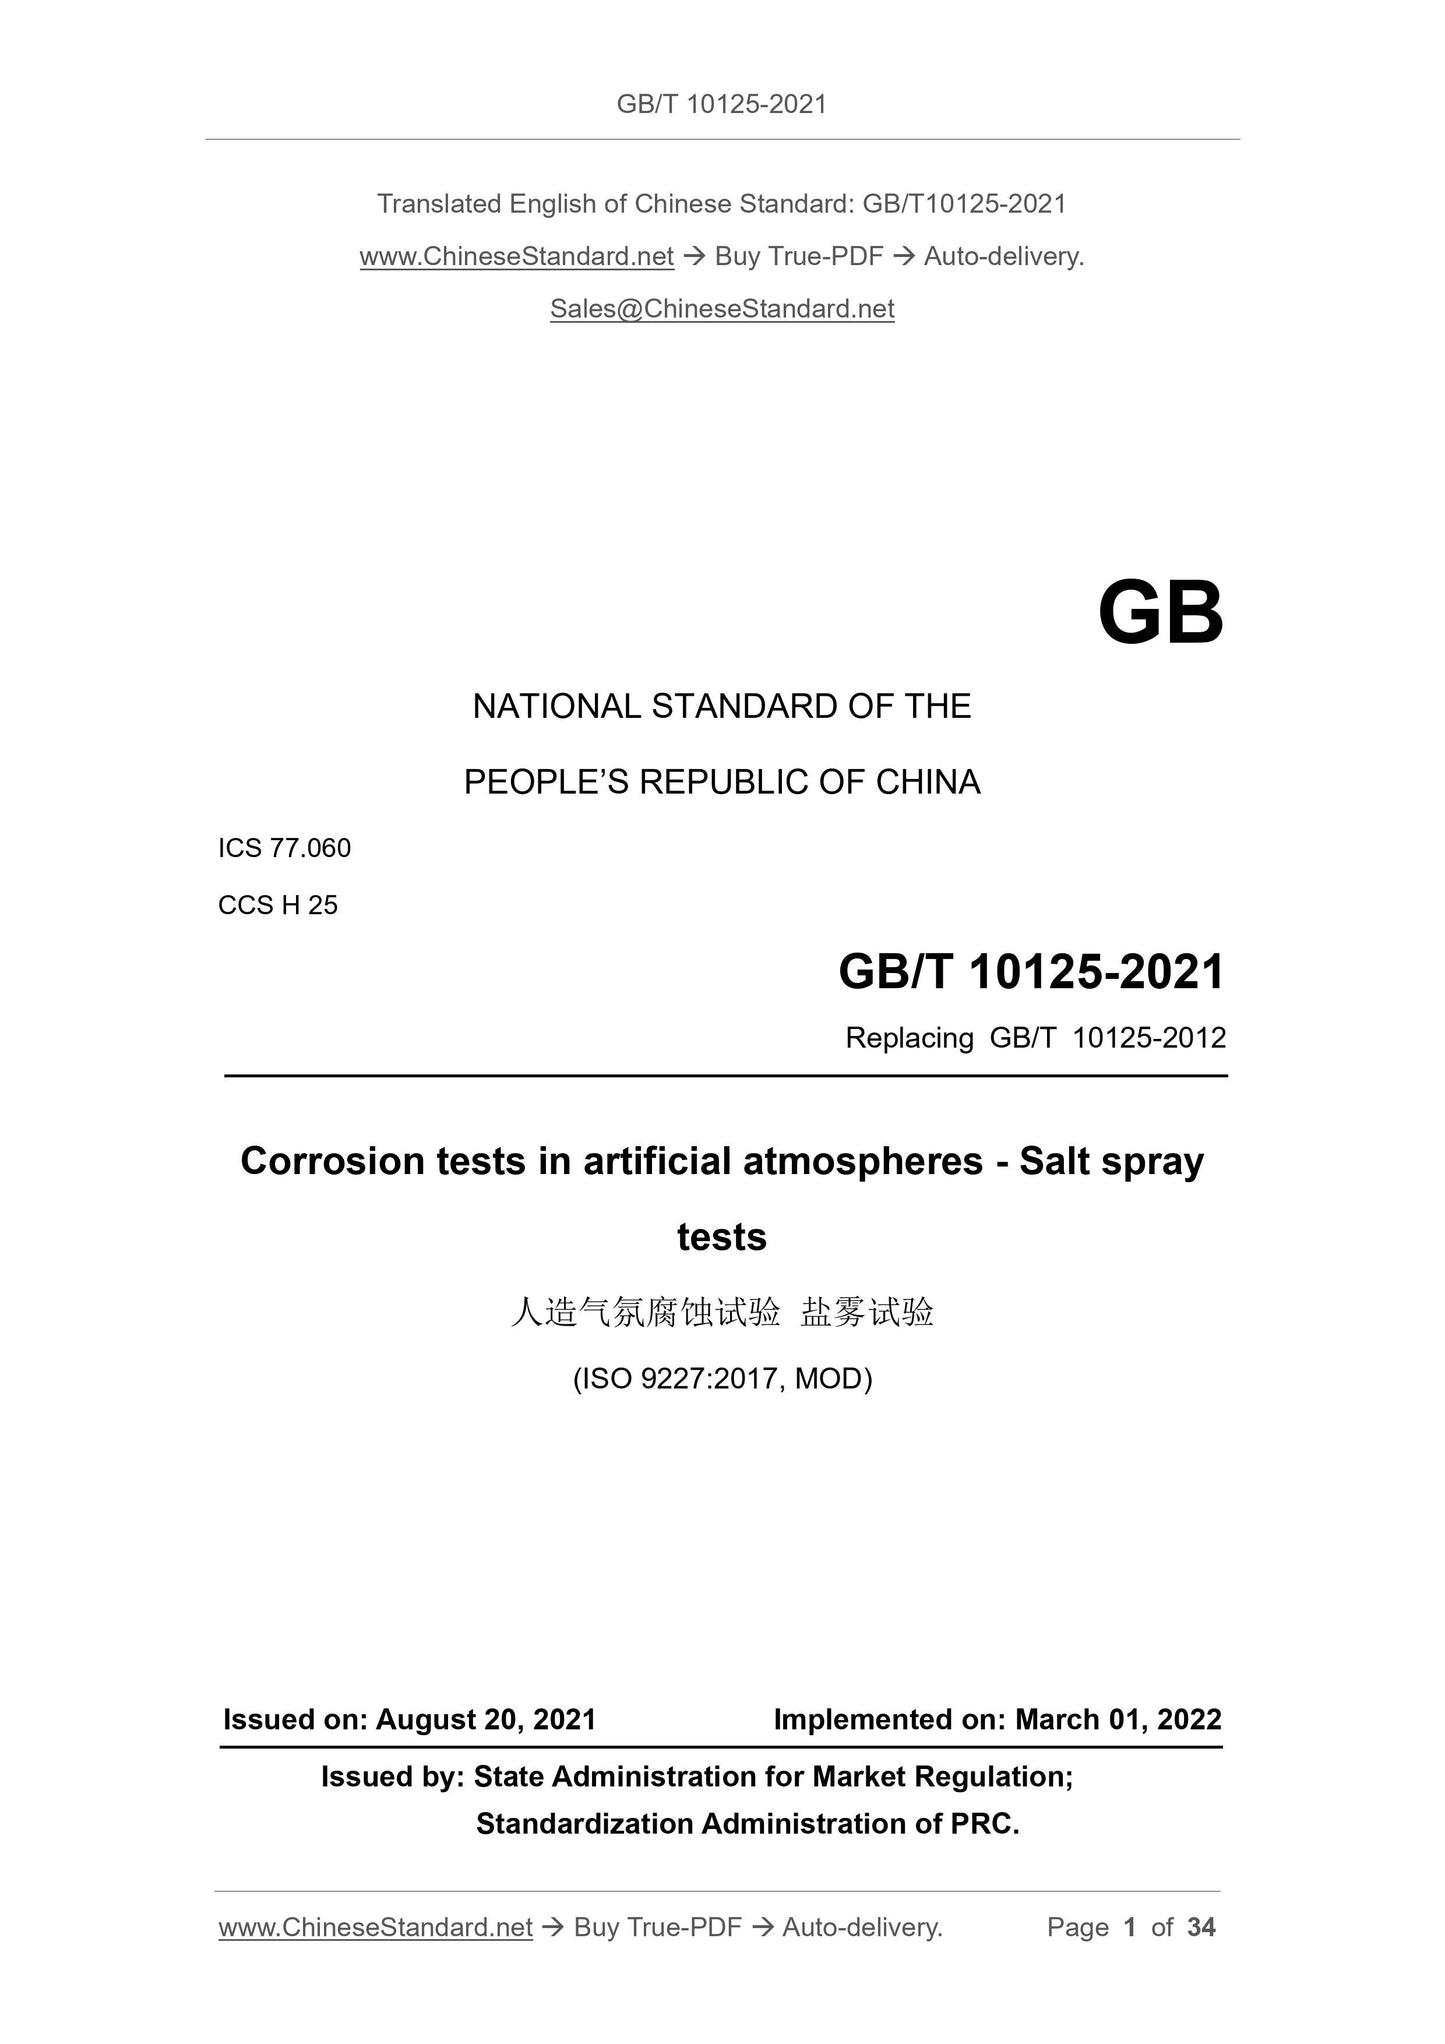 GB/T 10125-2021 Page 1